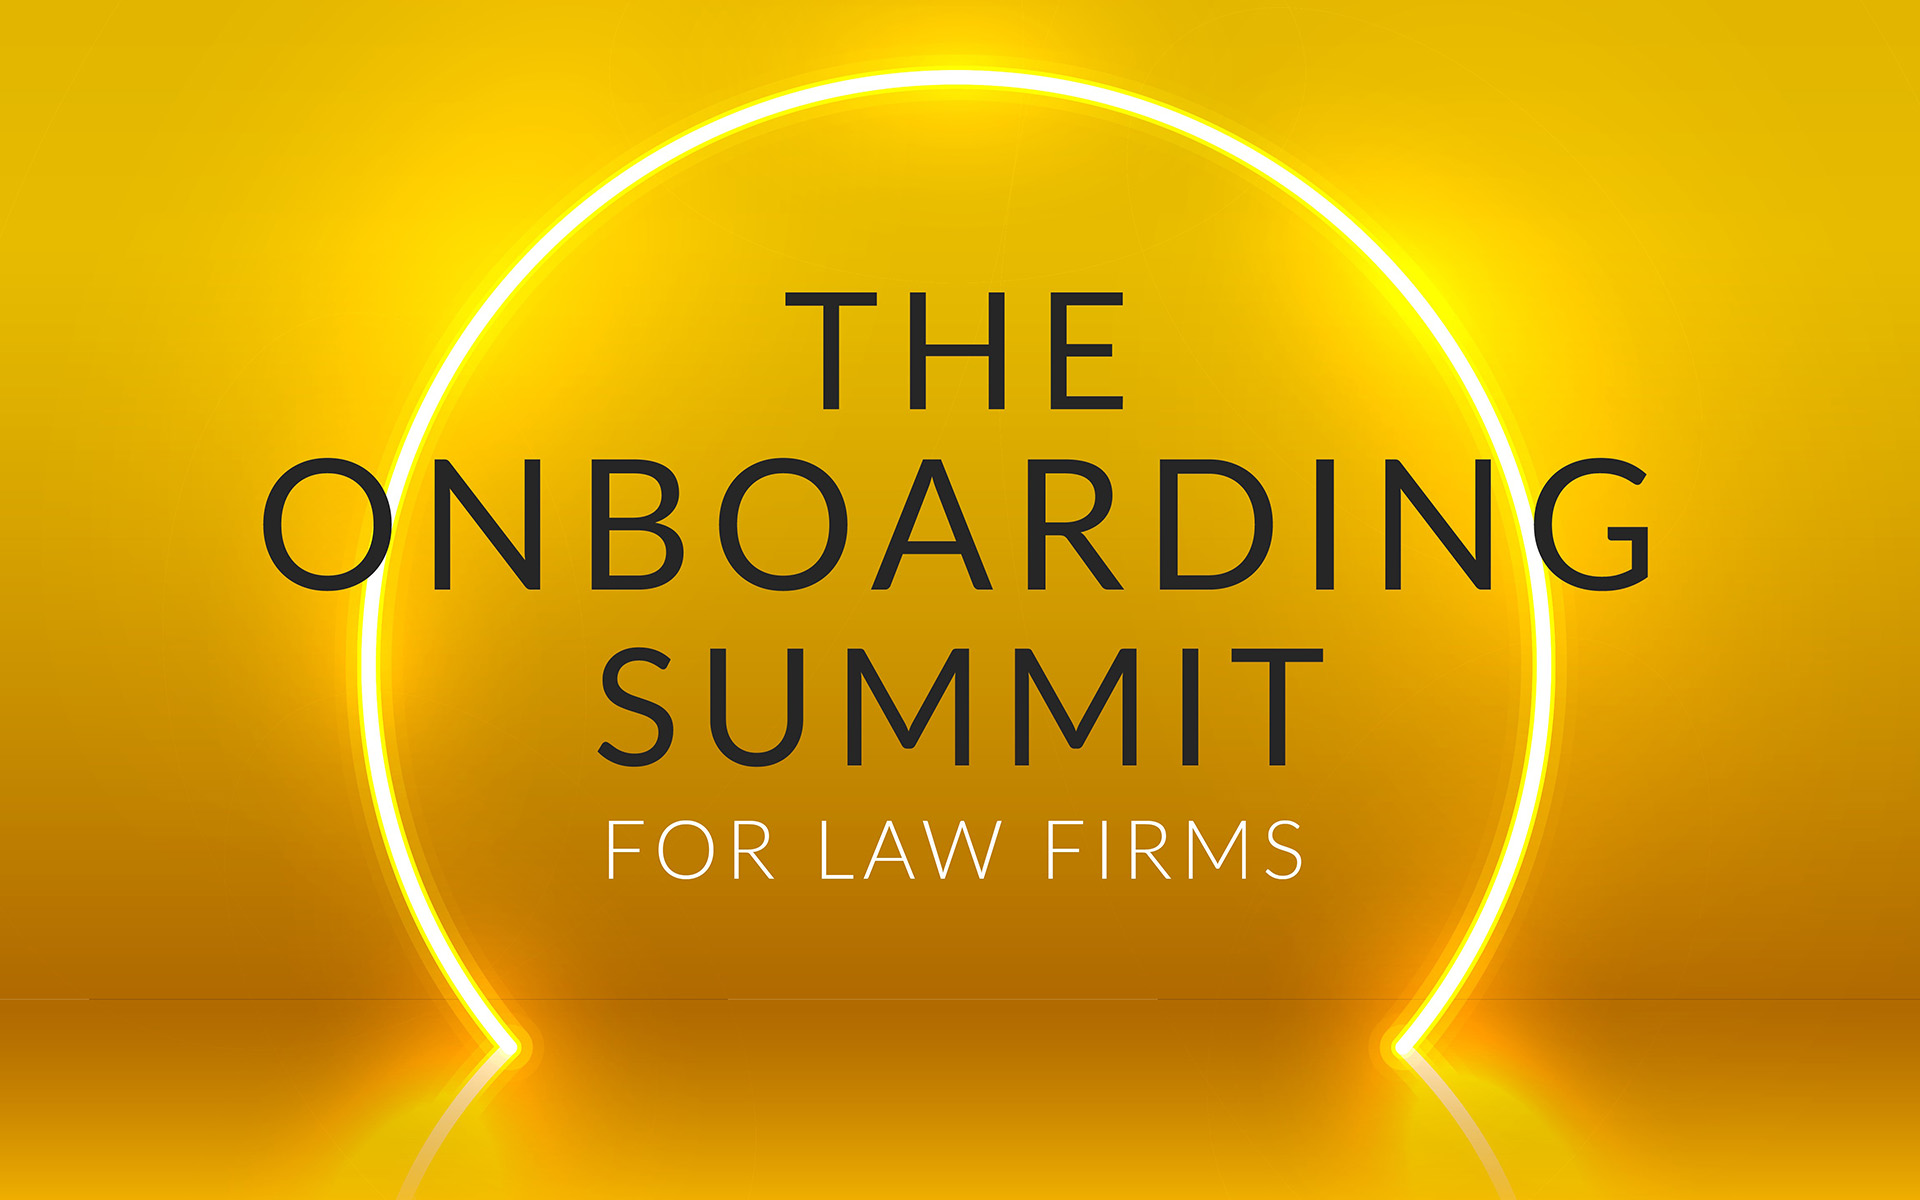 The onboarding summit logo with yellow neon circle on dark yellow background